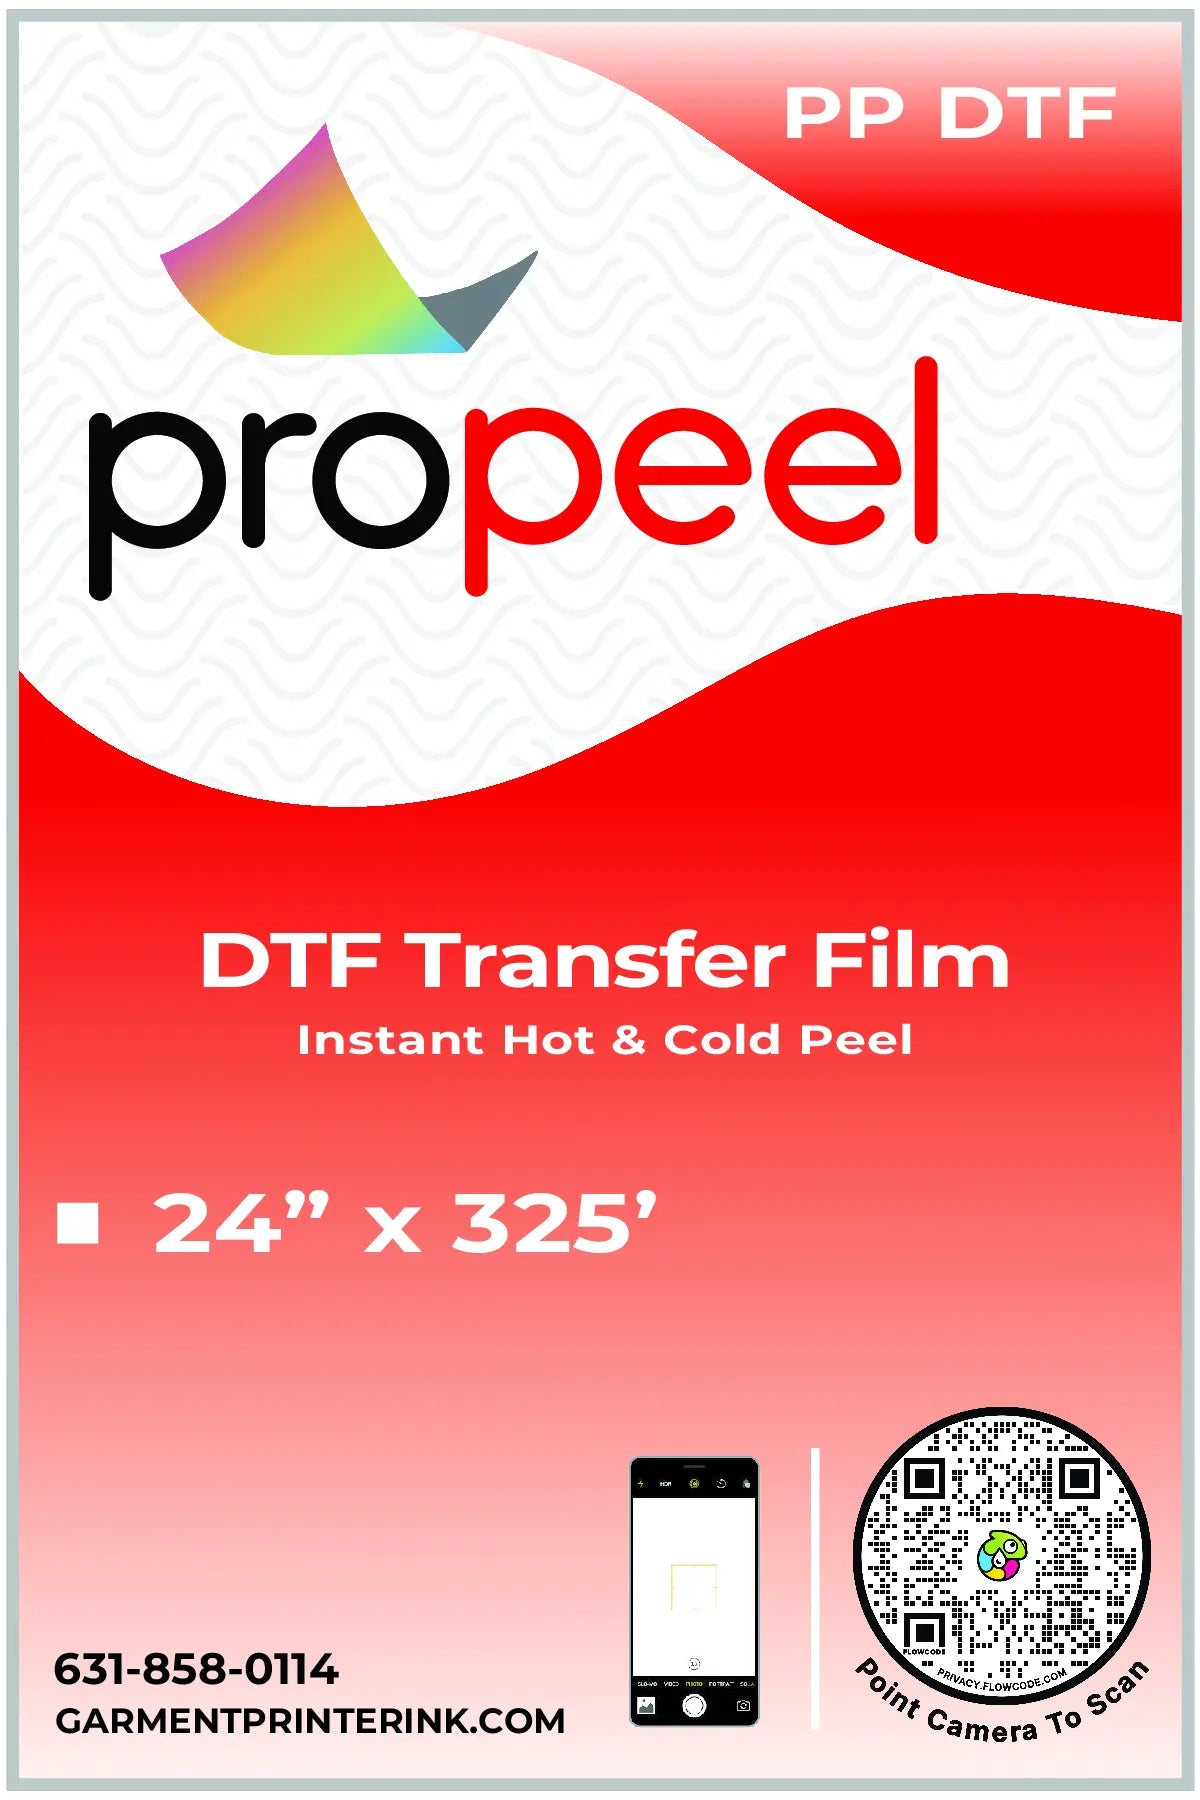 propeel direct to film roll 24" x 325' for dtf printing hot and cold peel